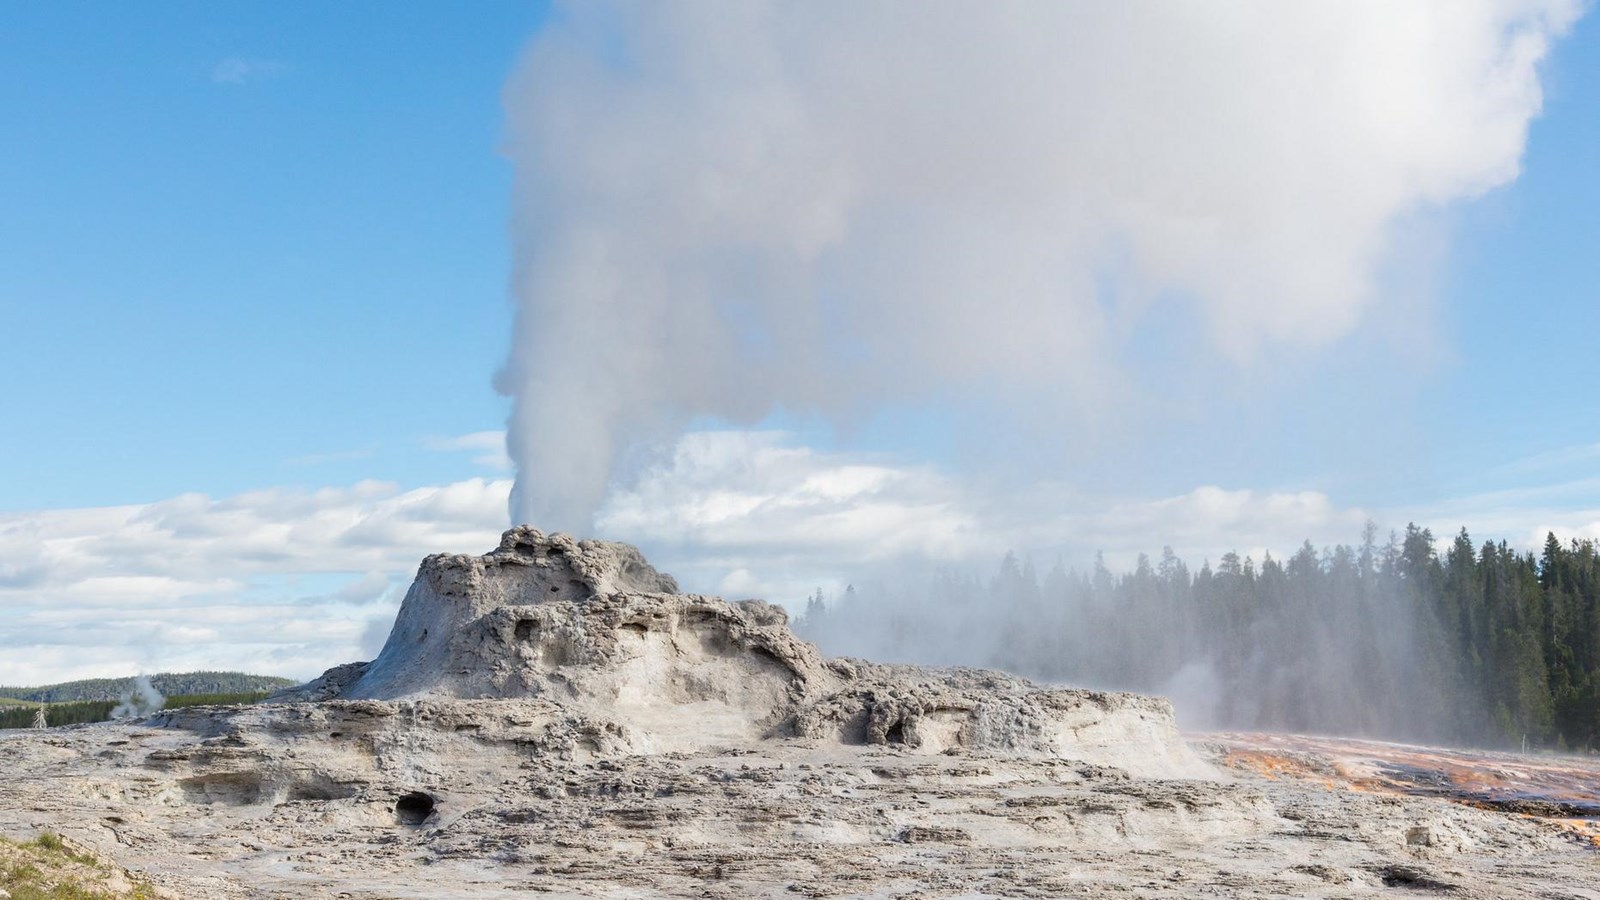 A large cone geyser with steam rising above against a blue sky